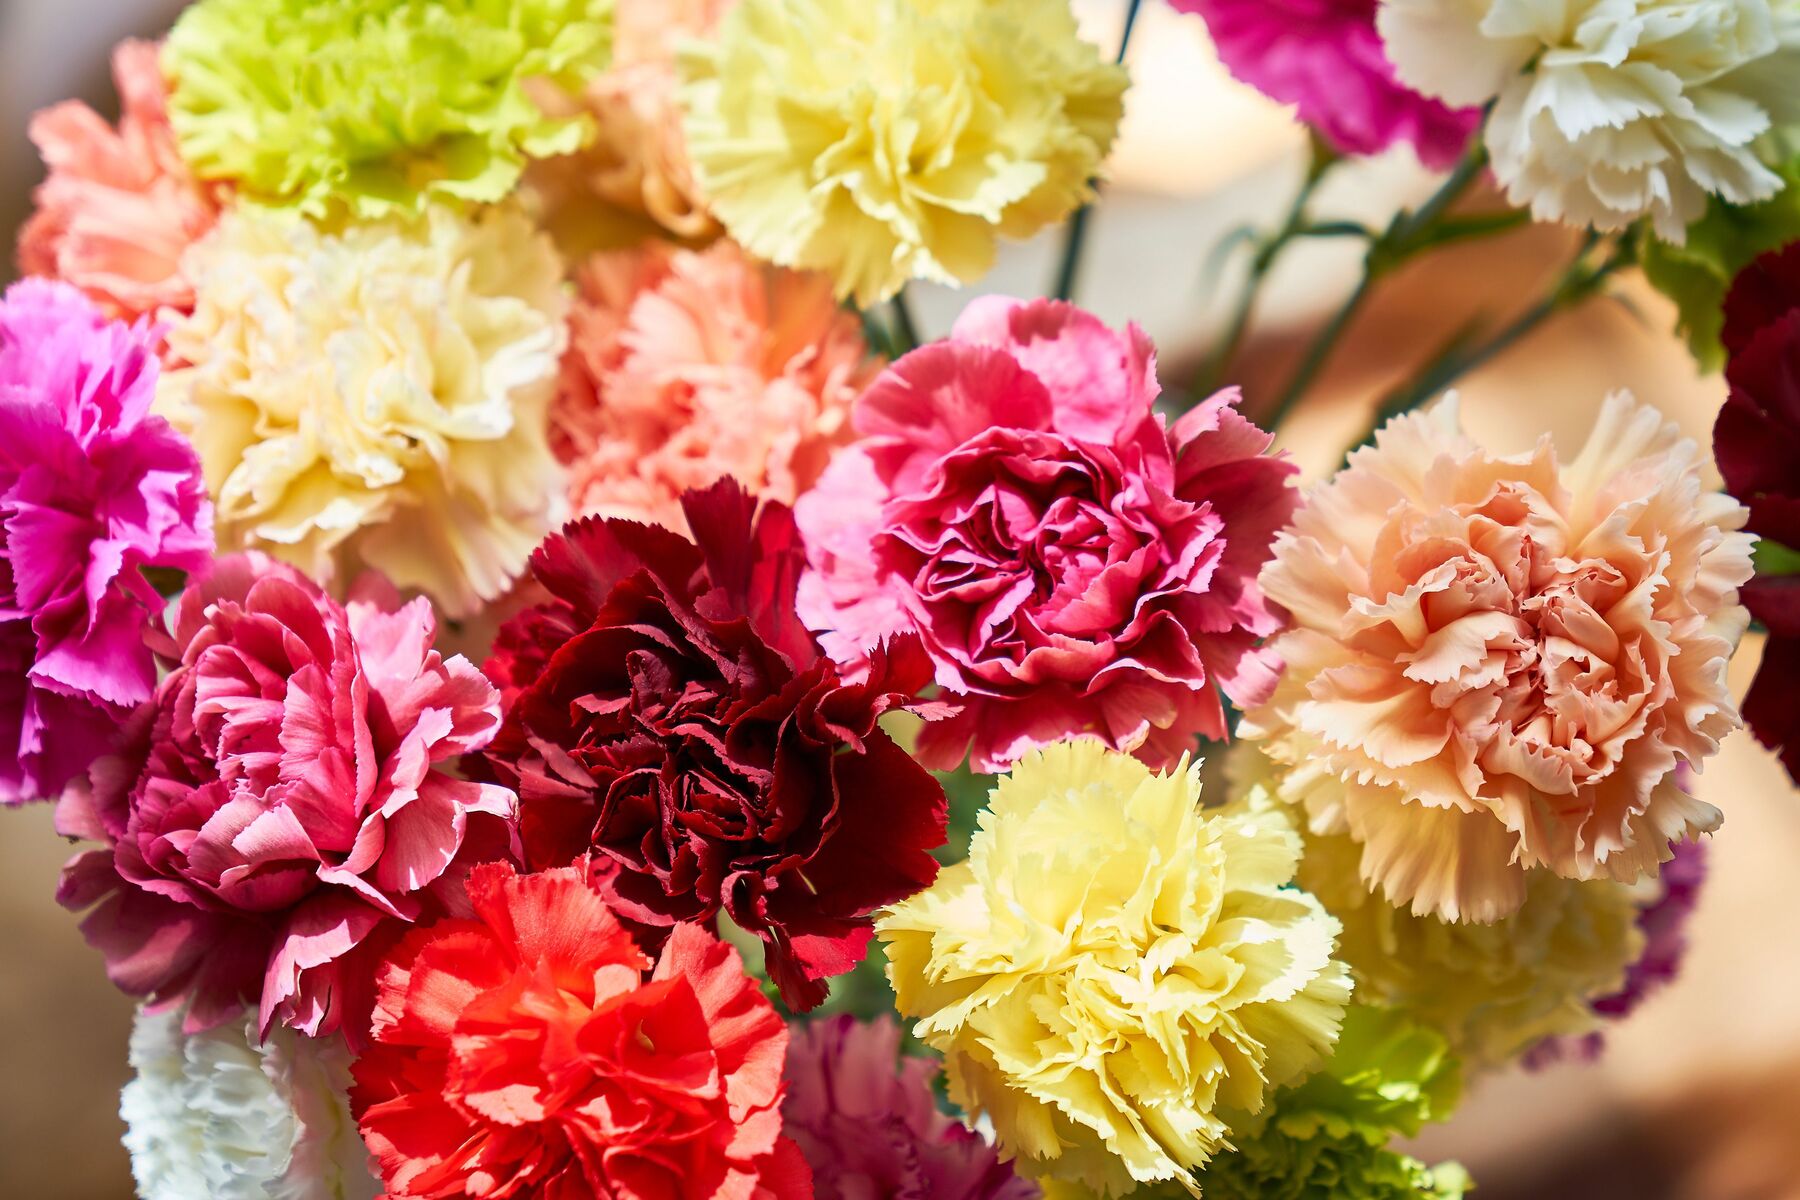 15-facts-about-bring-flowers-to-someone-day-may-15th